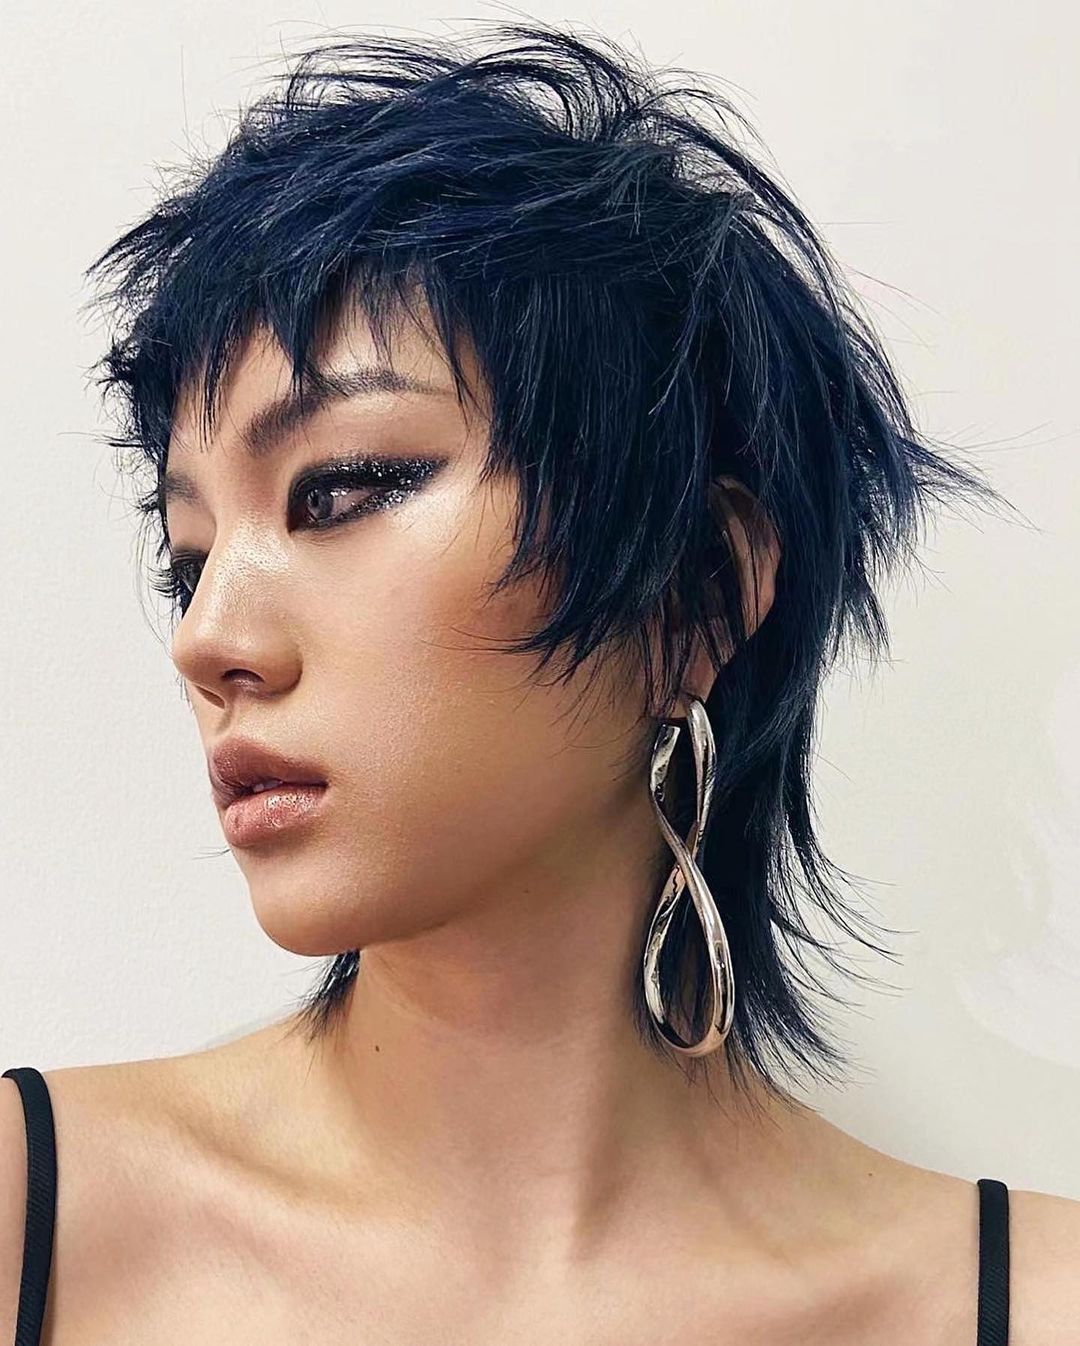 22 New Dramatic Wolf Cut Ideas and Styling Guide - Hairstylery